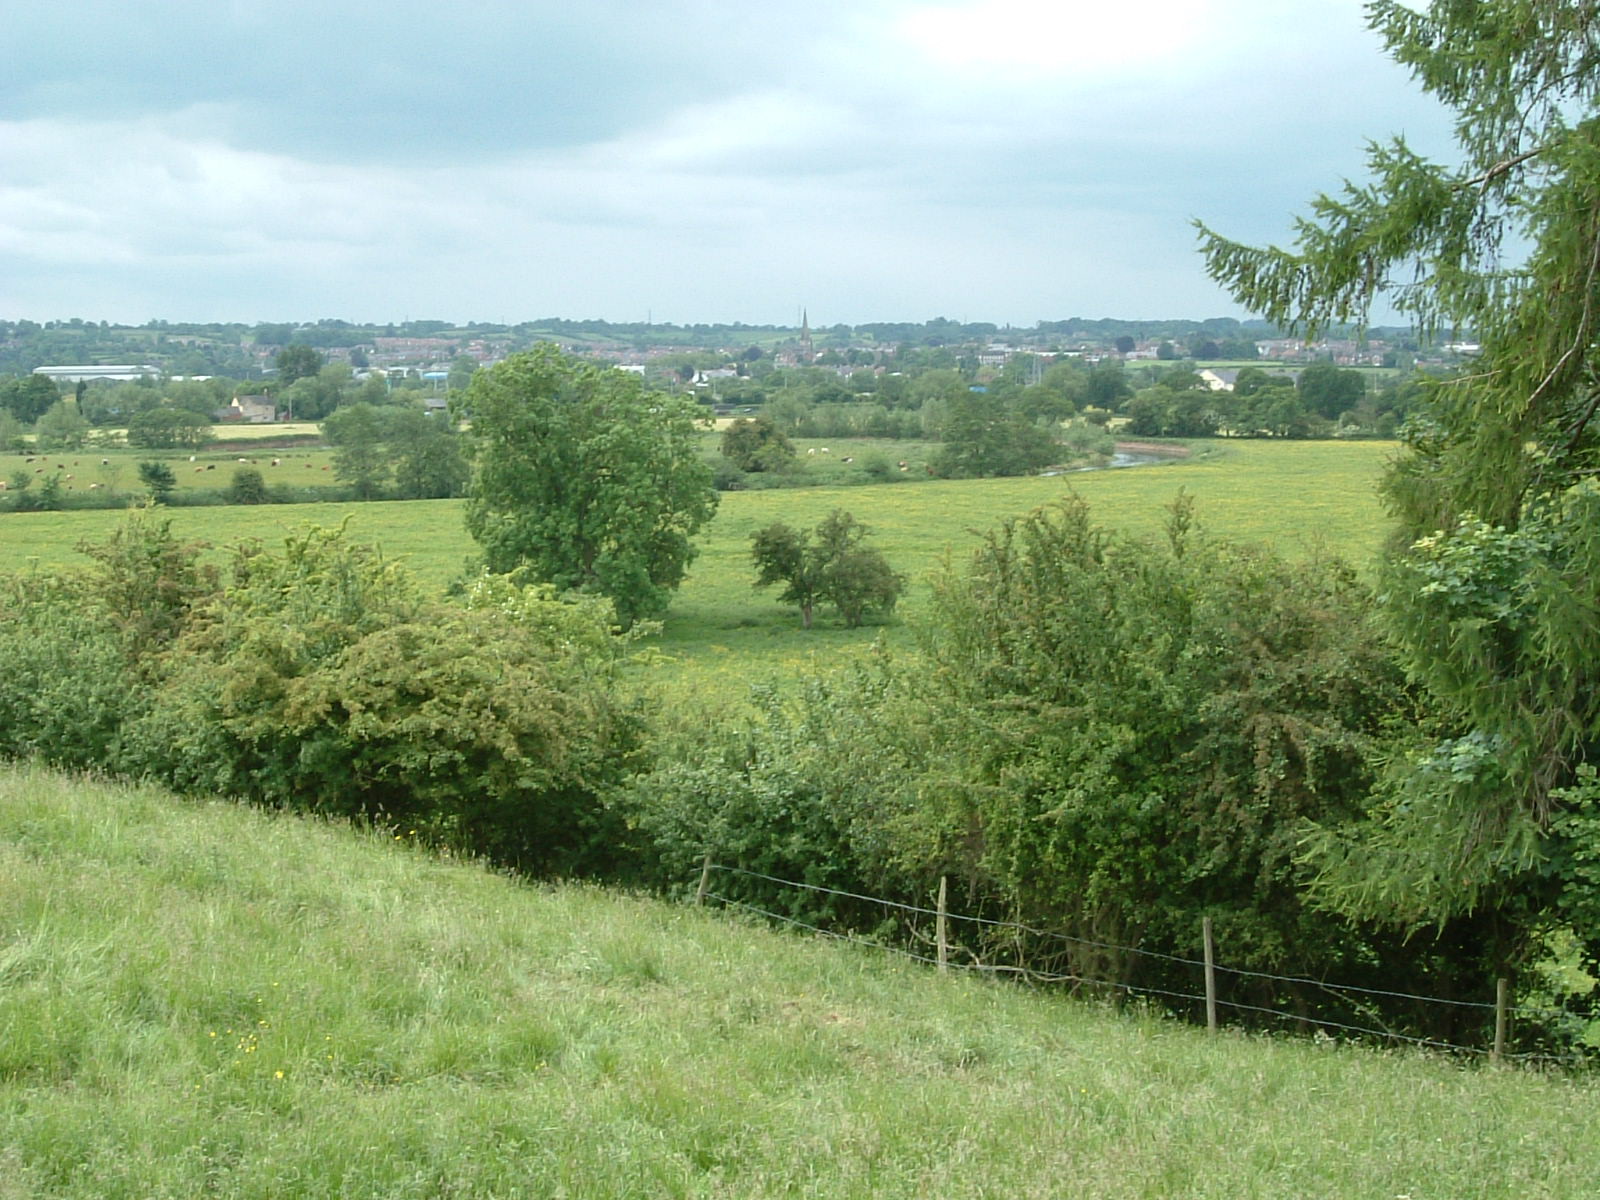 Uttoxeter from a distance